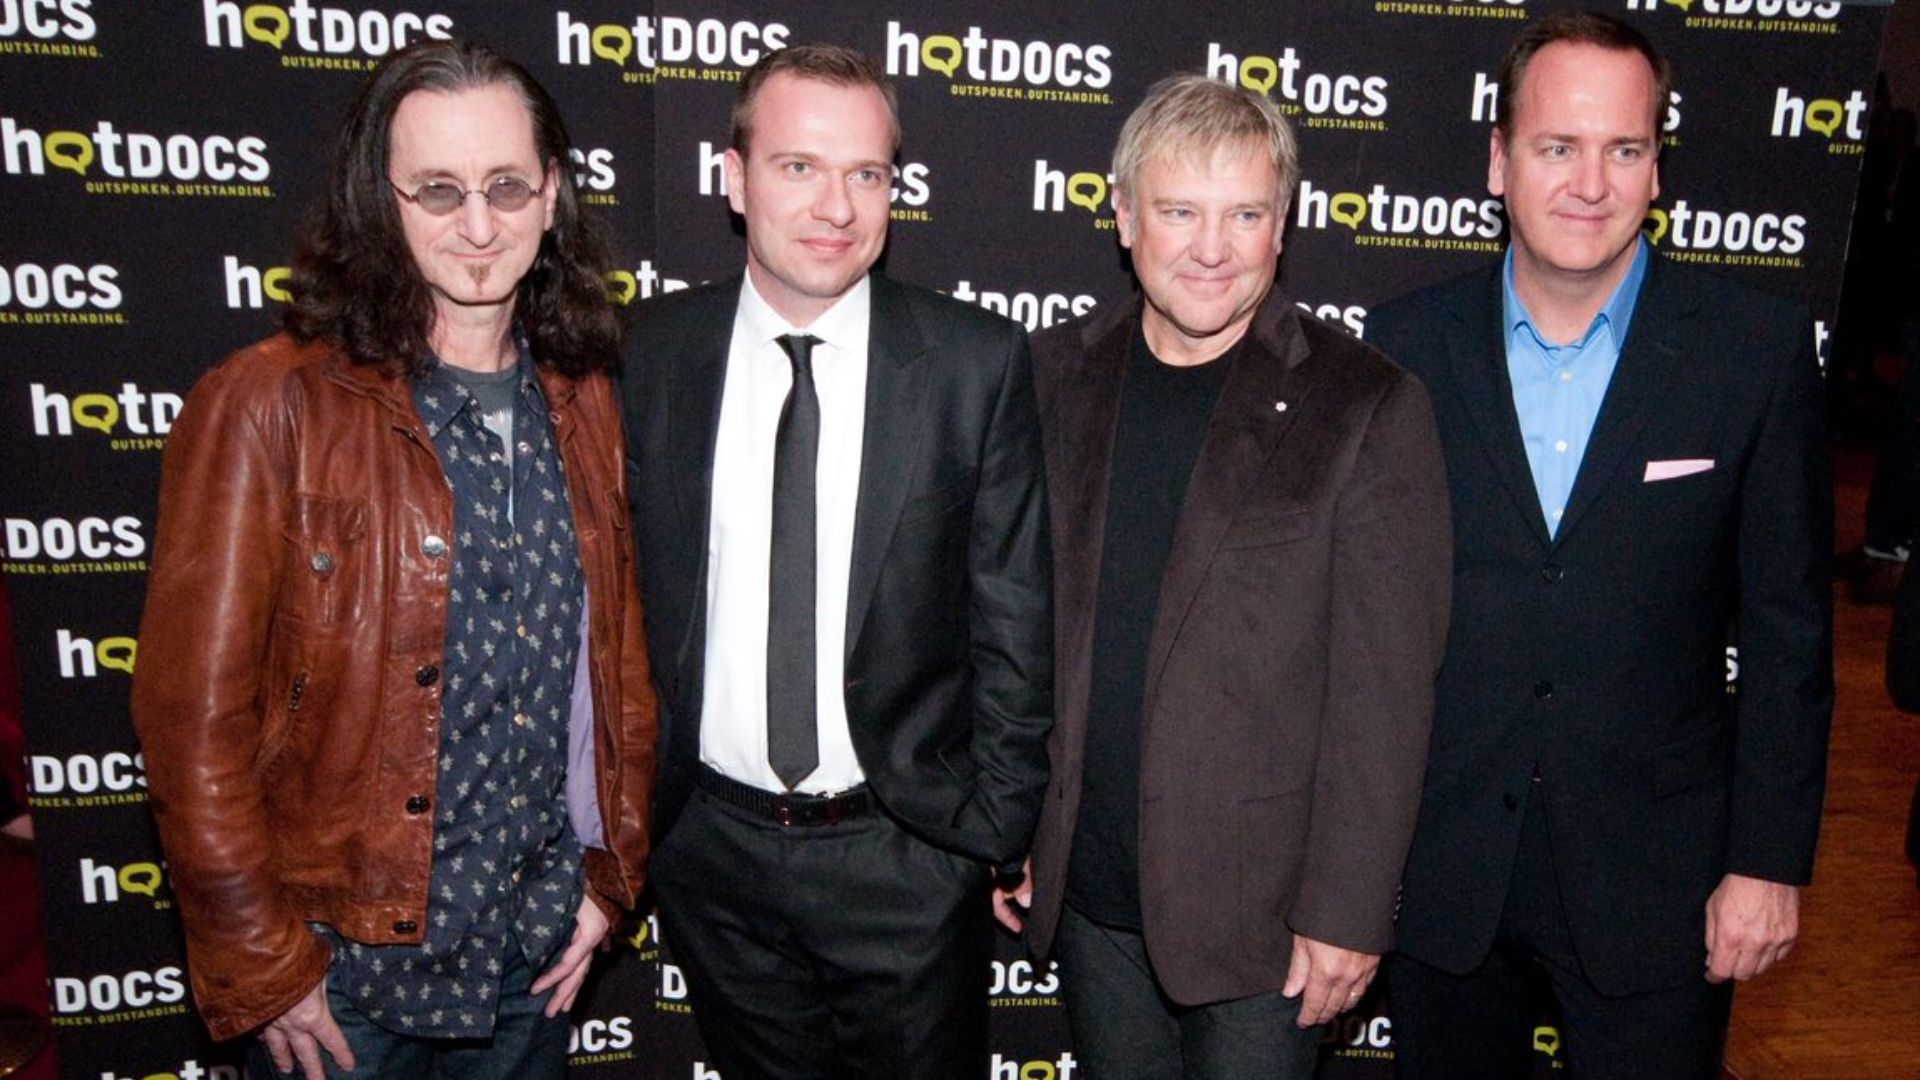 Three members of Rush band stand next to Hot Docs' Chris McDonald in front of a Hot Docs logo backdrop.